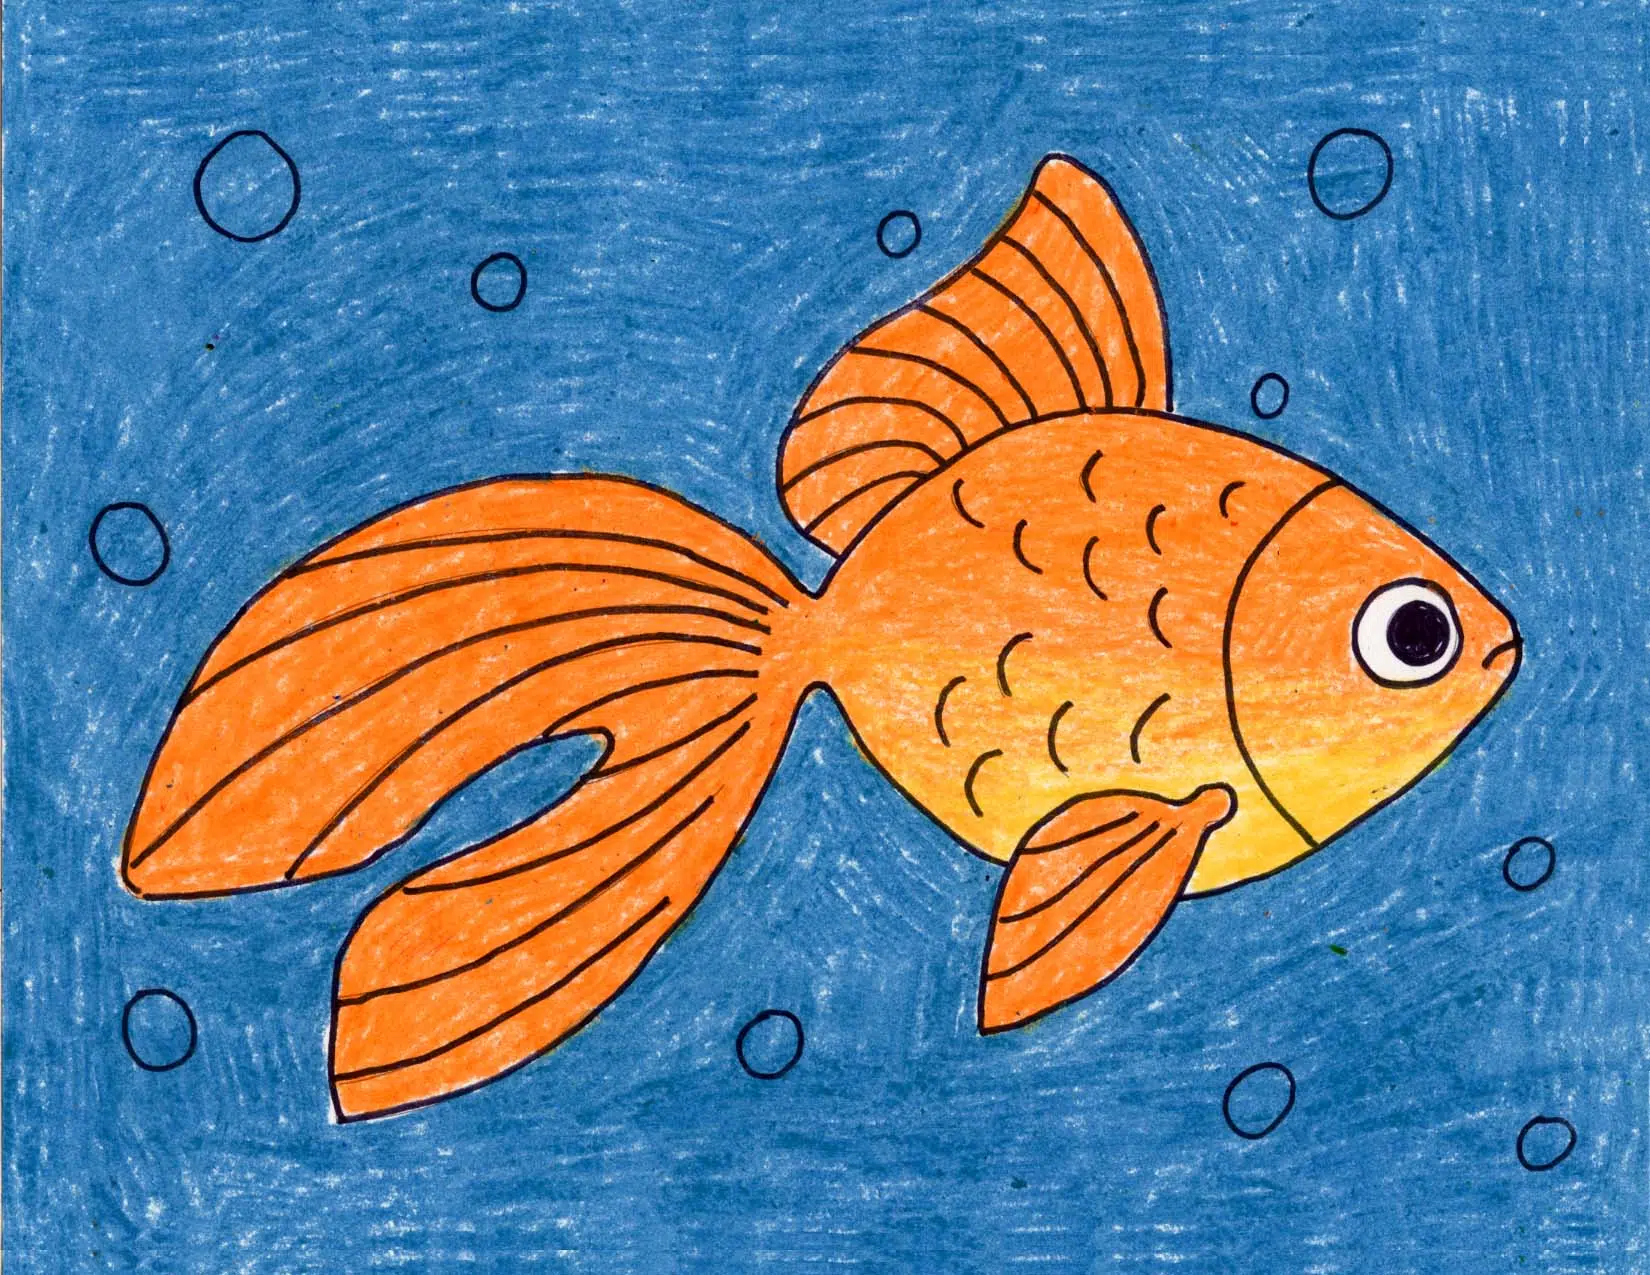 How to Draw a Fish for Kids | Fish sketch, Easy fish drawing, Fish drawings-saigonsouth.com.vn